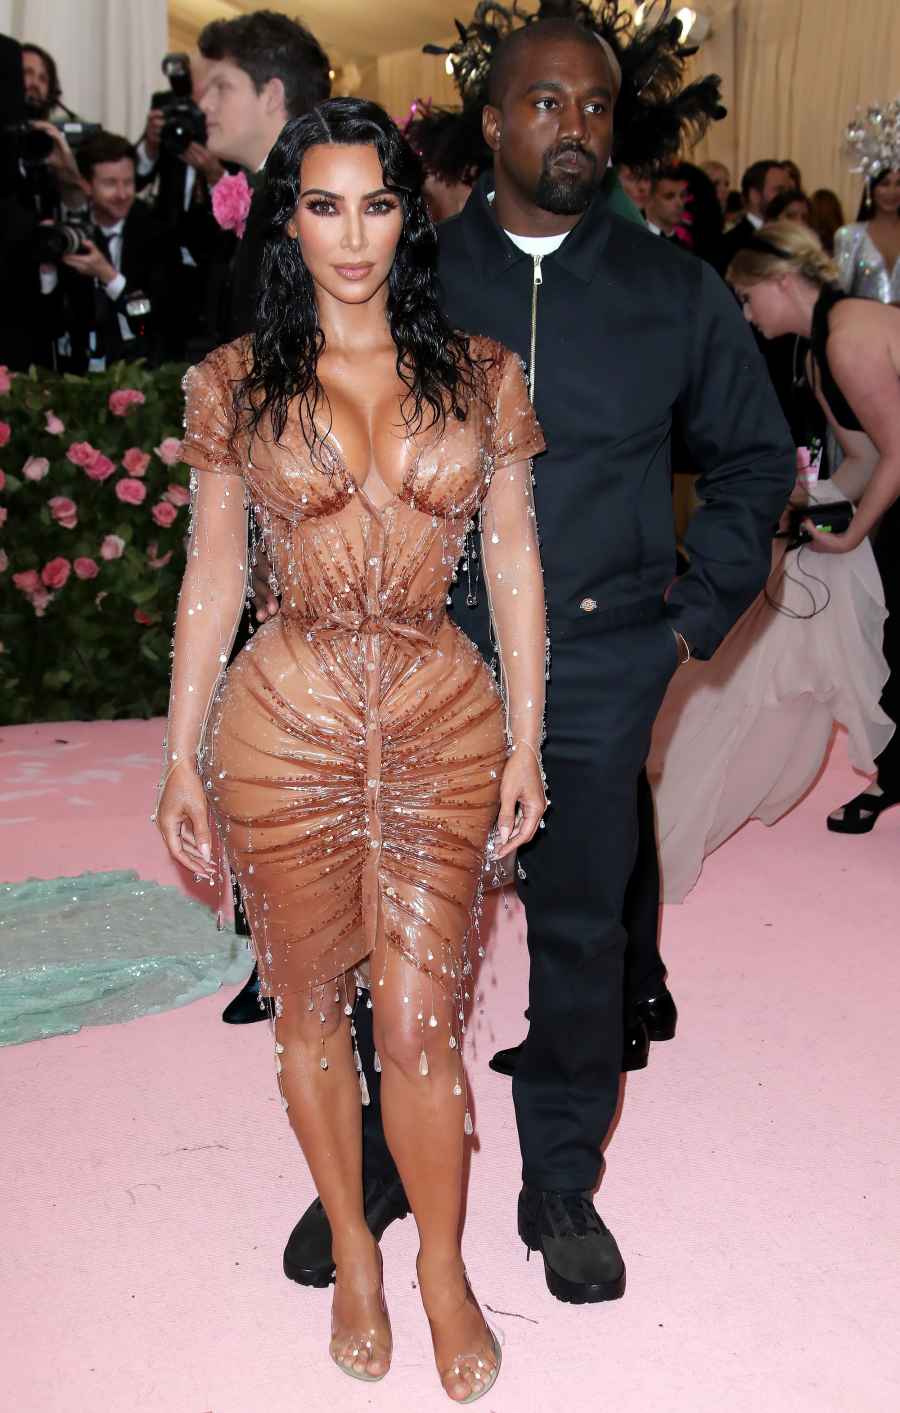 Kim Kardashian and Kanye West’s Best Fashion Moments of All Time